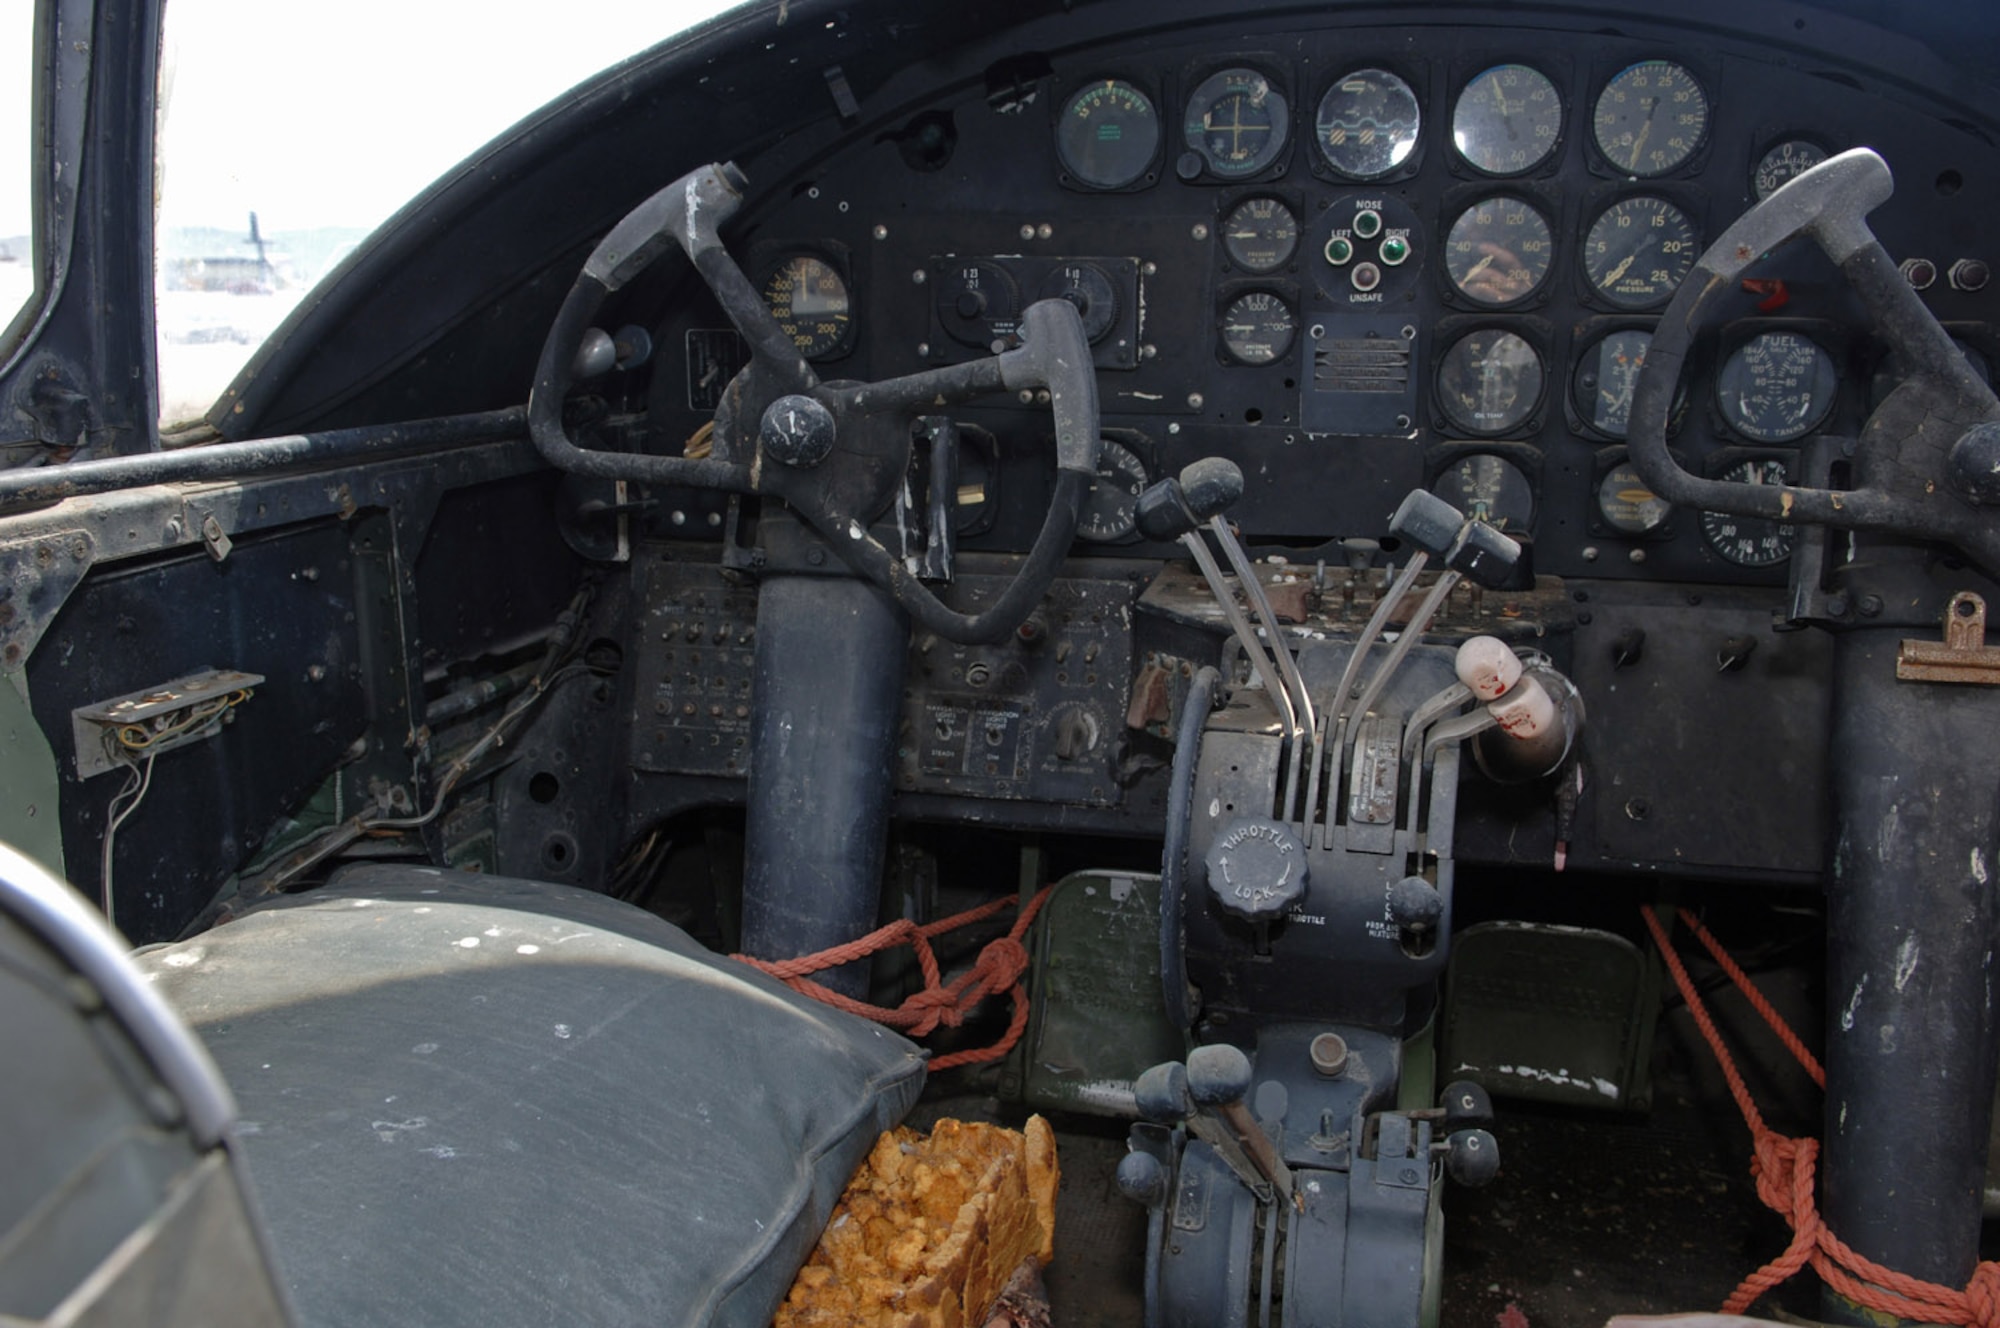 The flight deck of Gen. Dwight D. Eisenhower's North American B-25 Mitchell personal transport remains in fair condition at the South Dakota Air and Space Museum May 21, 2008. This B-25 is on loan from the National Museum of the United States Air Force located at Wright-Patterson Air Force Base, Ohio. (U.S. Air Force photo/Airman Corey Hook)